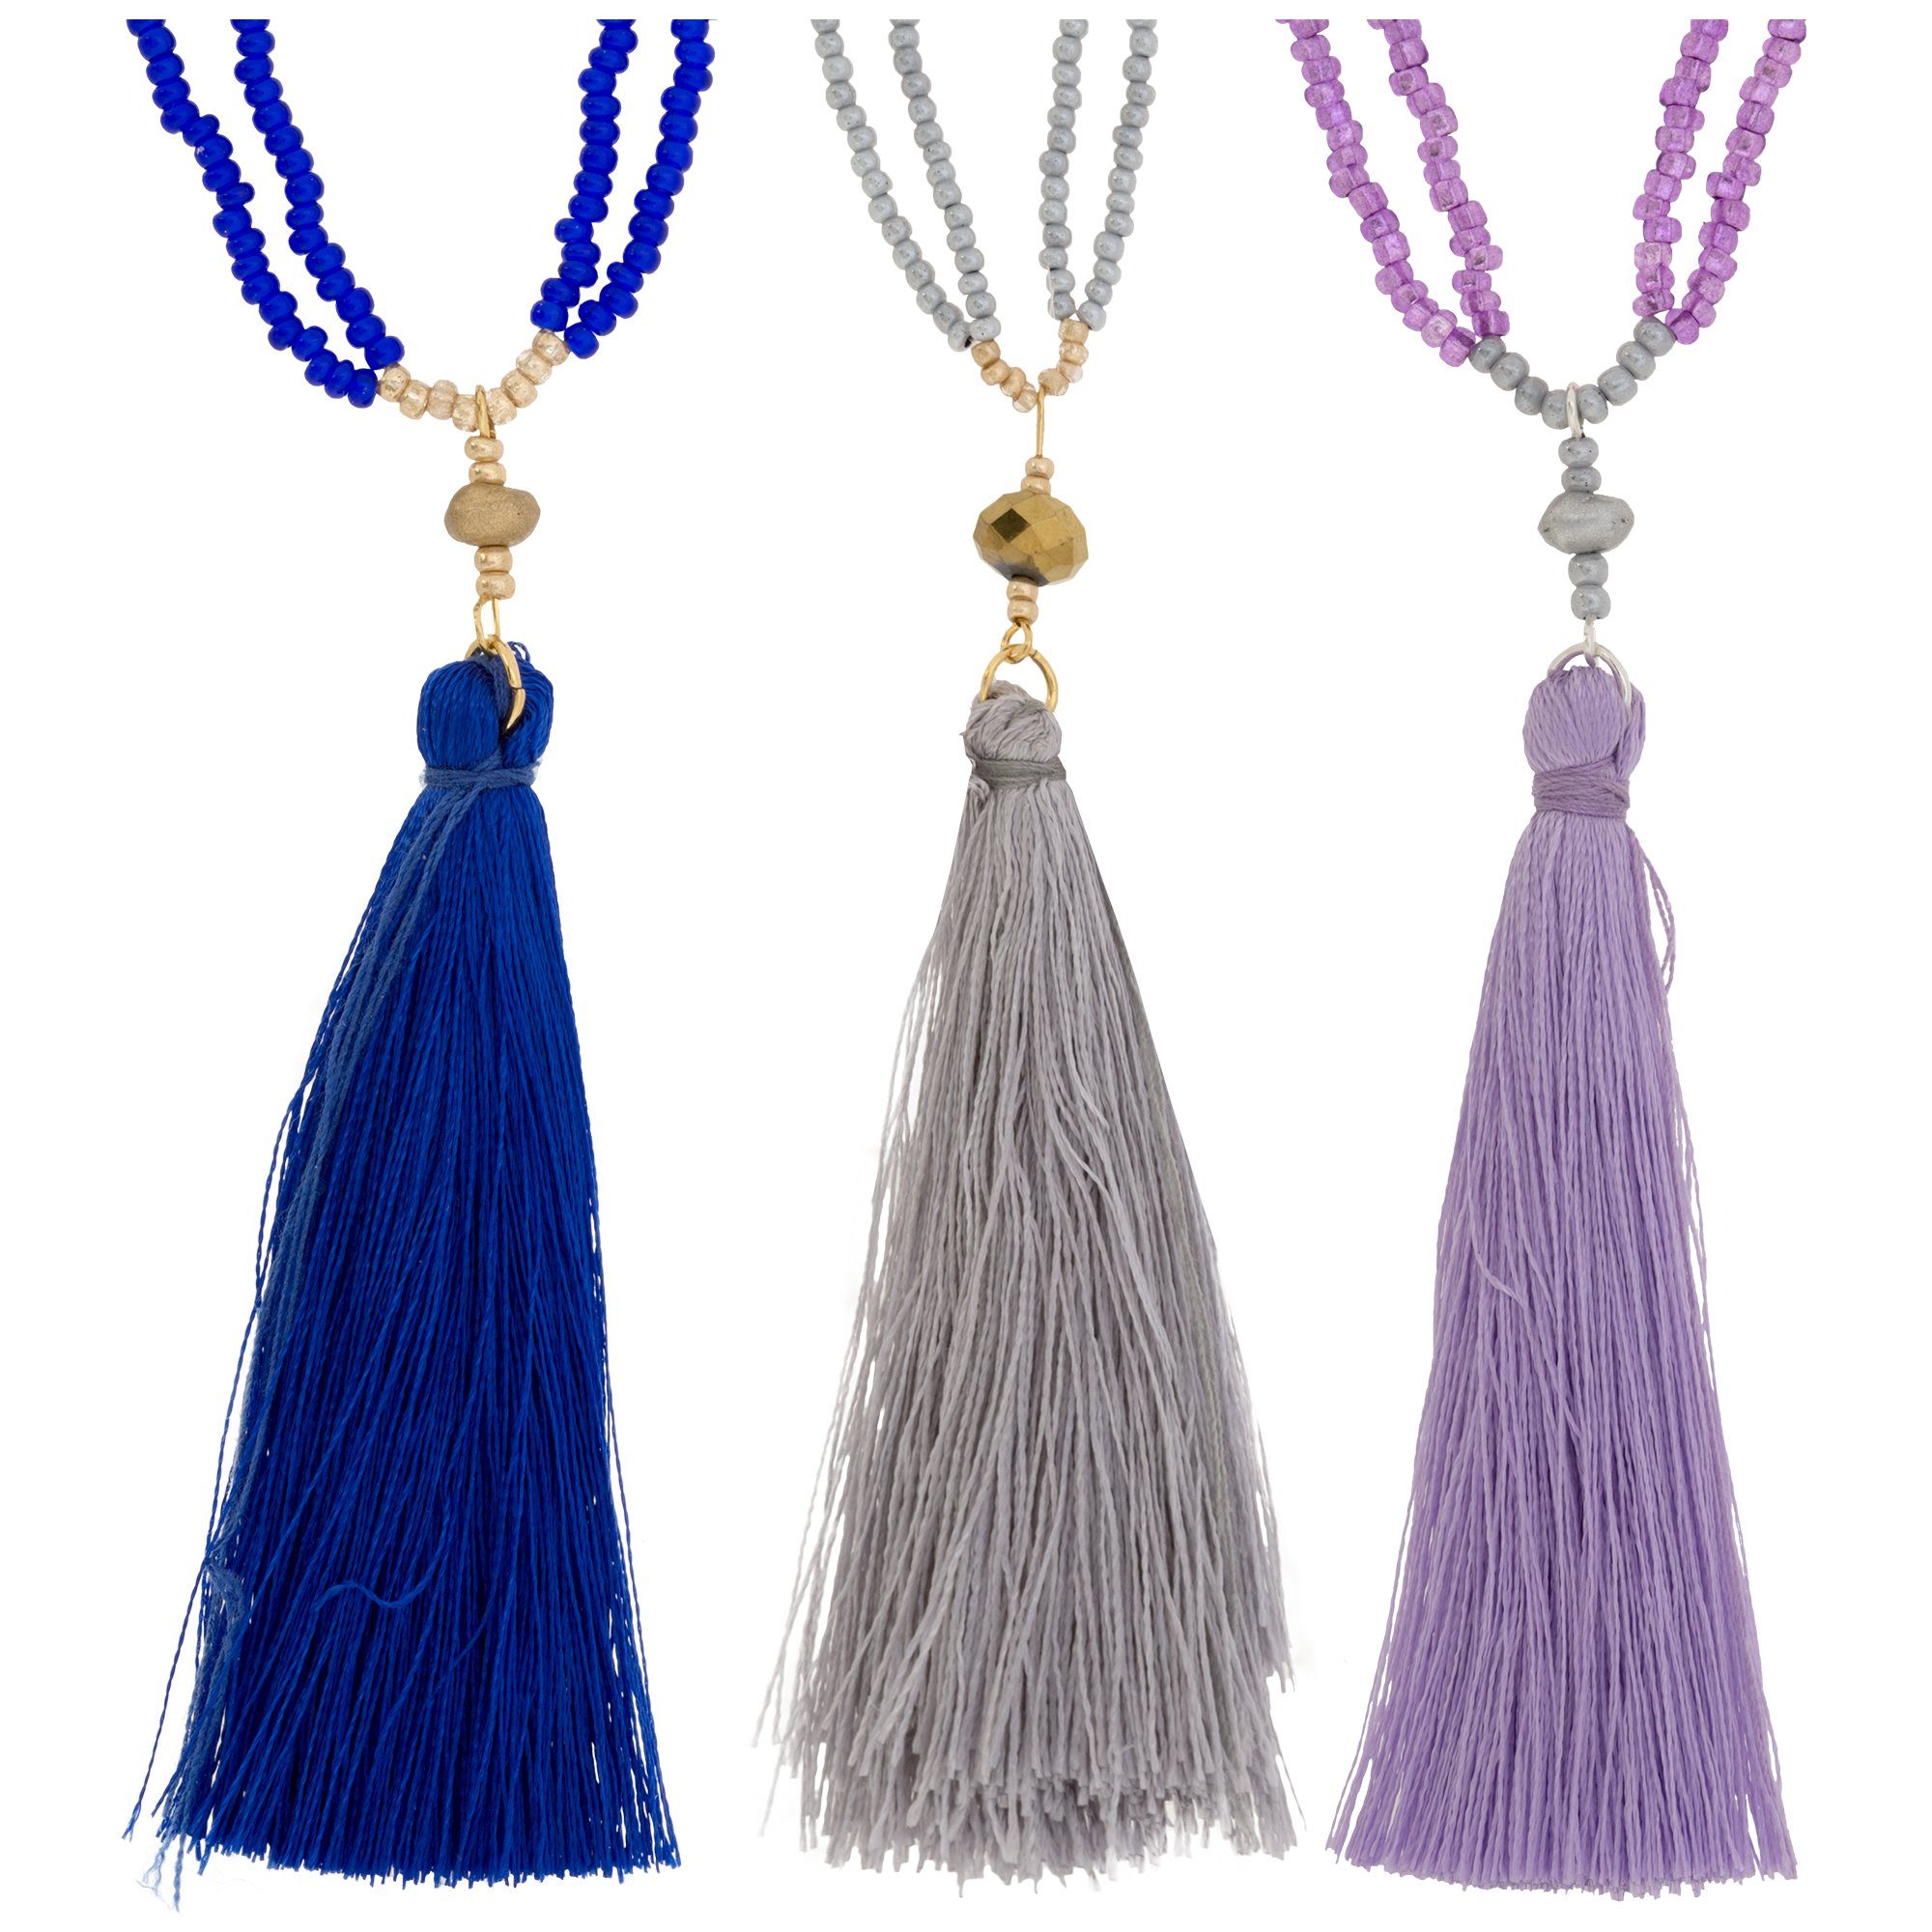 Ombre Tassel Necklace - Silver